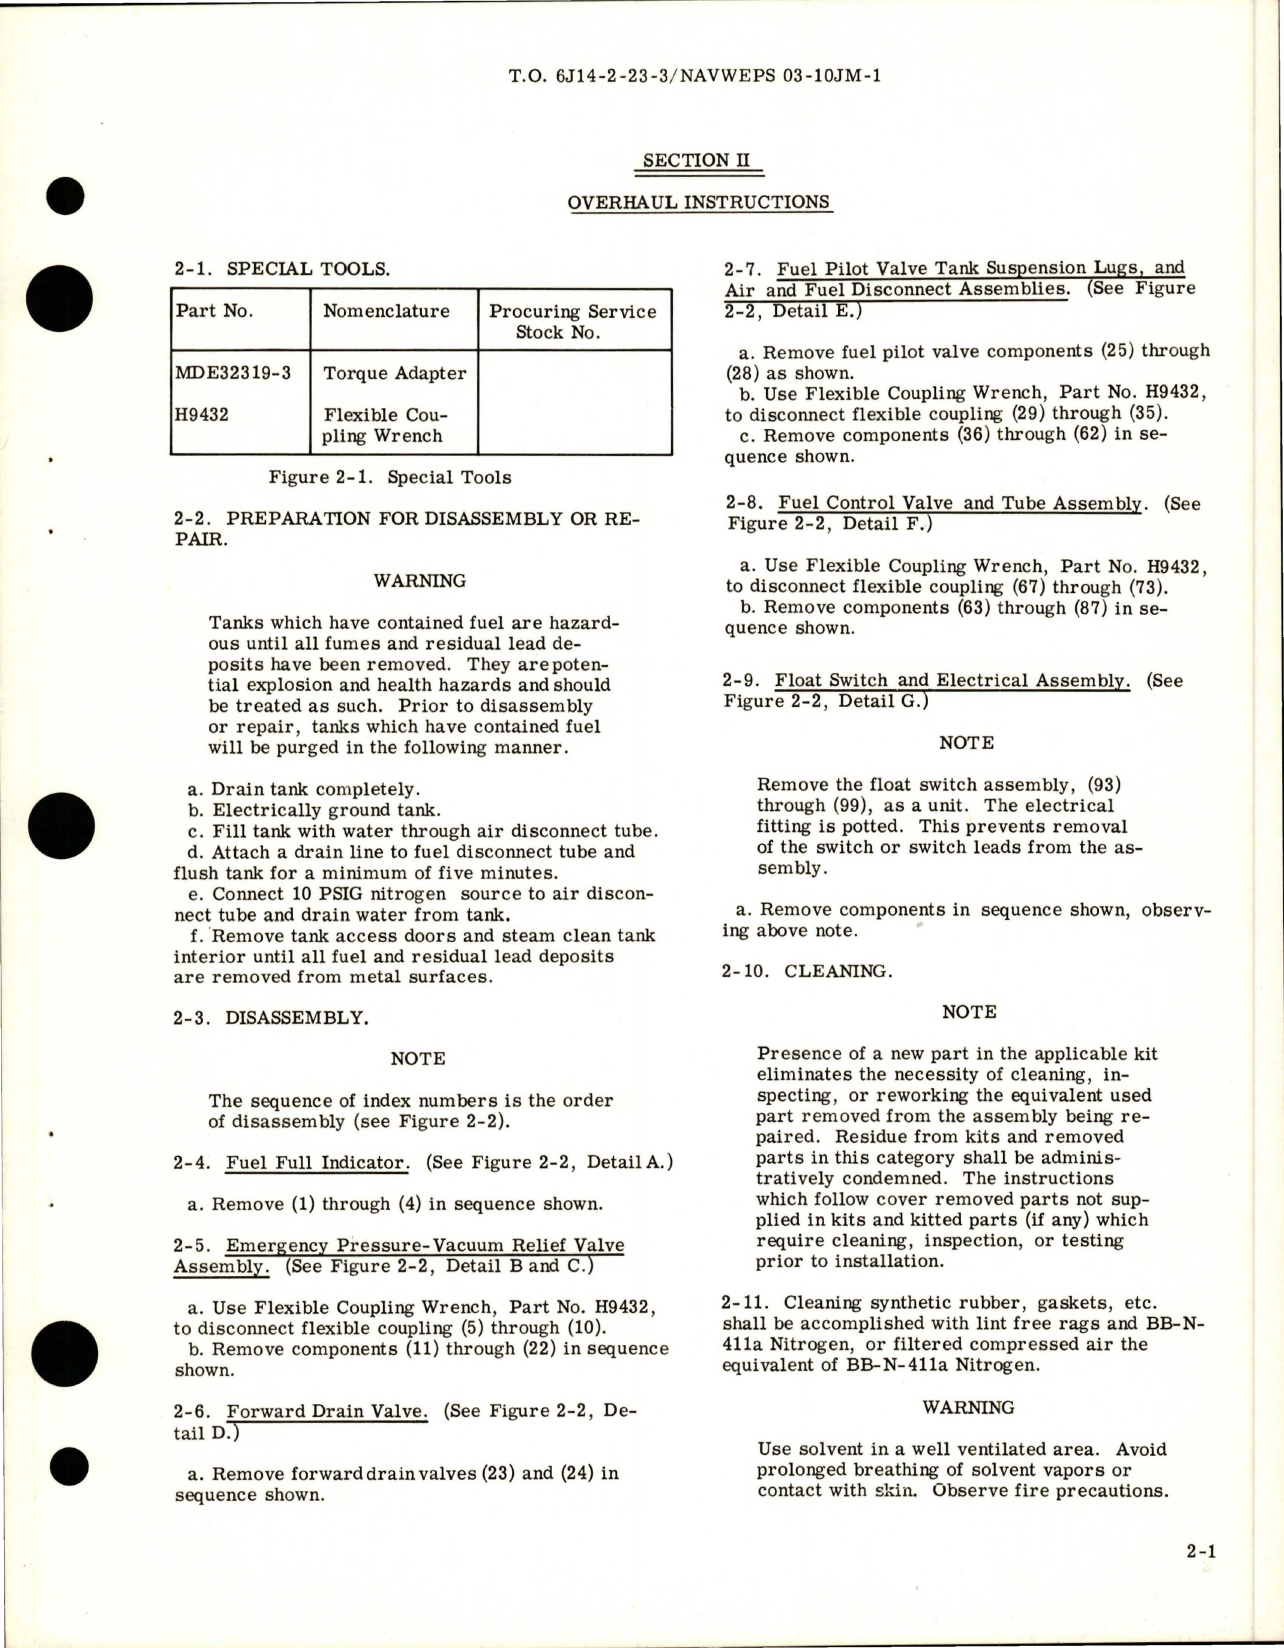 Sample page 7 from AirCorps Library document: Overhaul Manual for External Centerline Fuel Tank